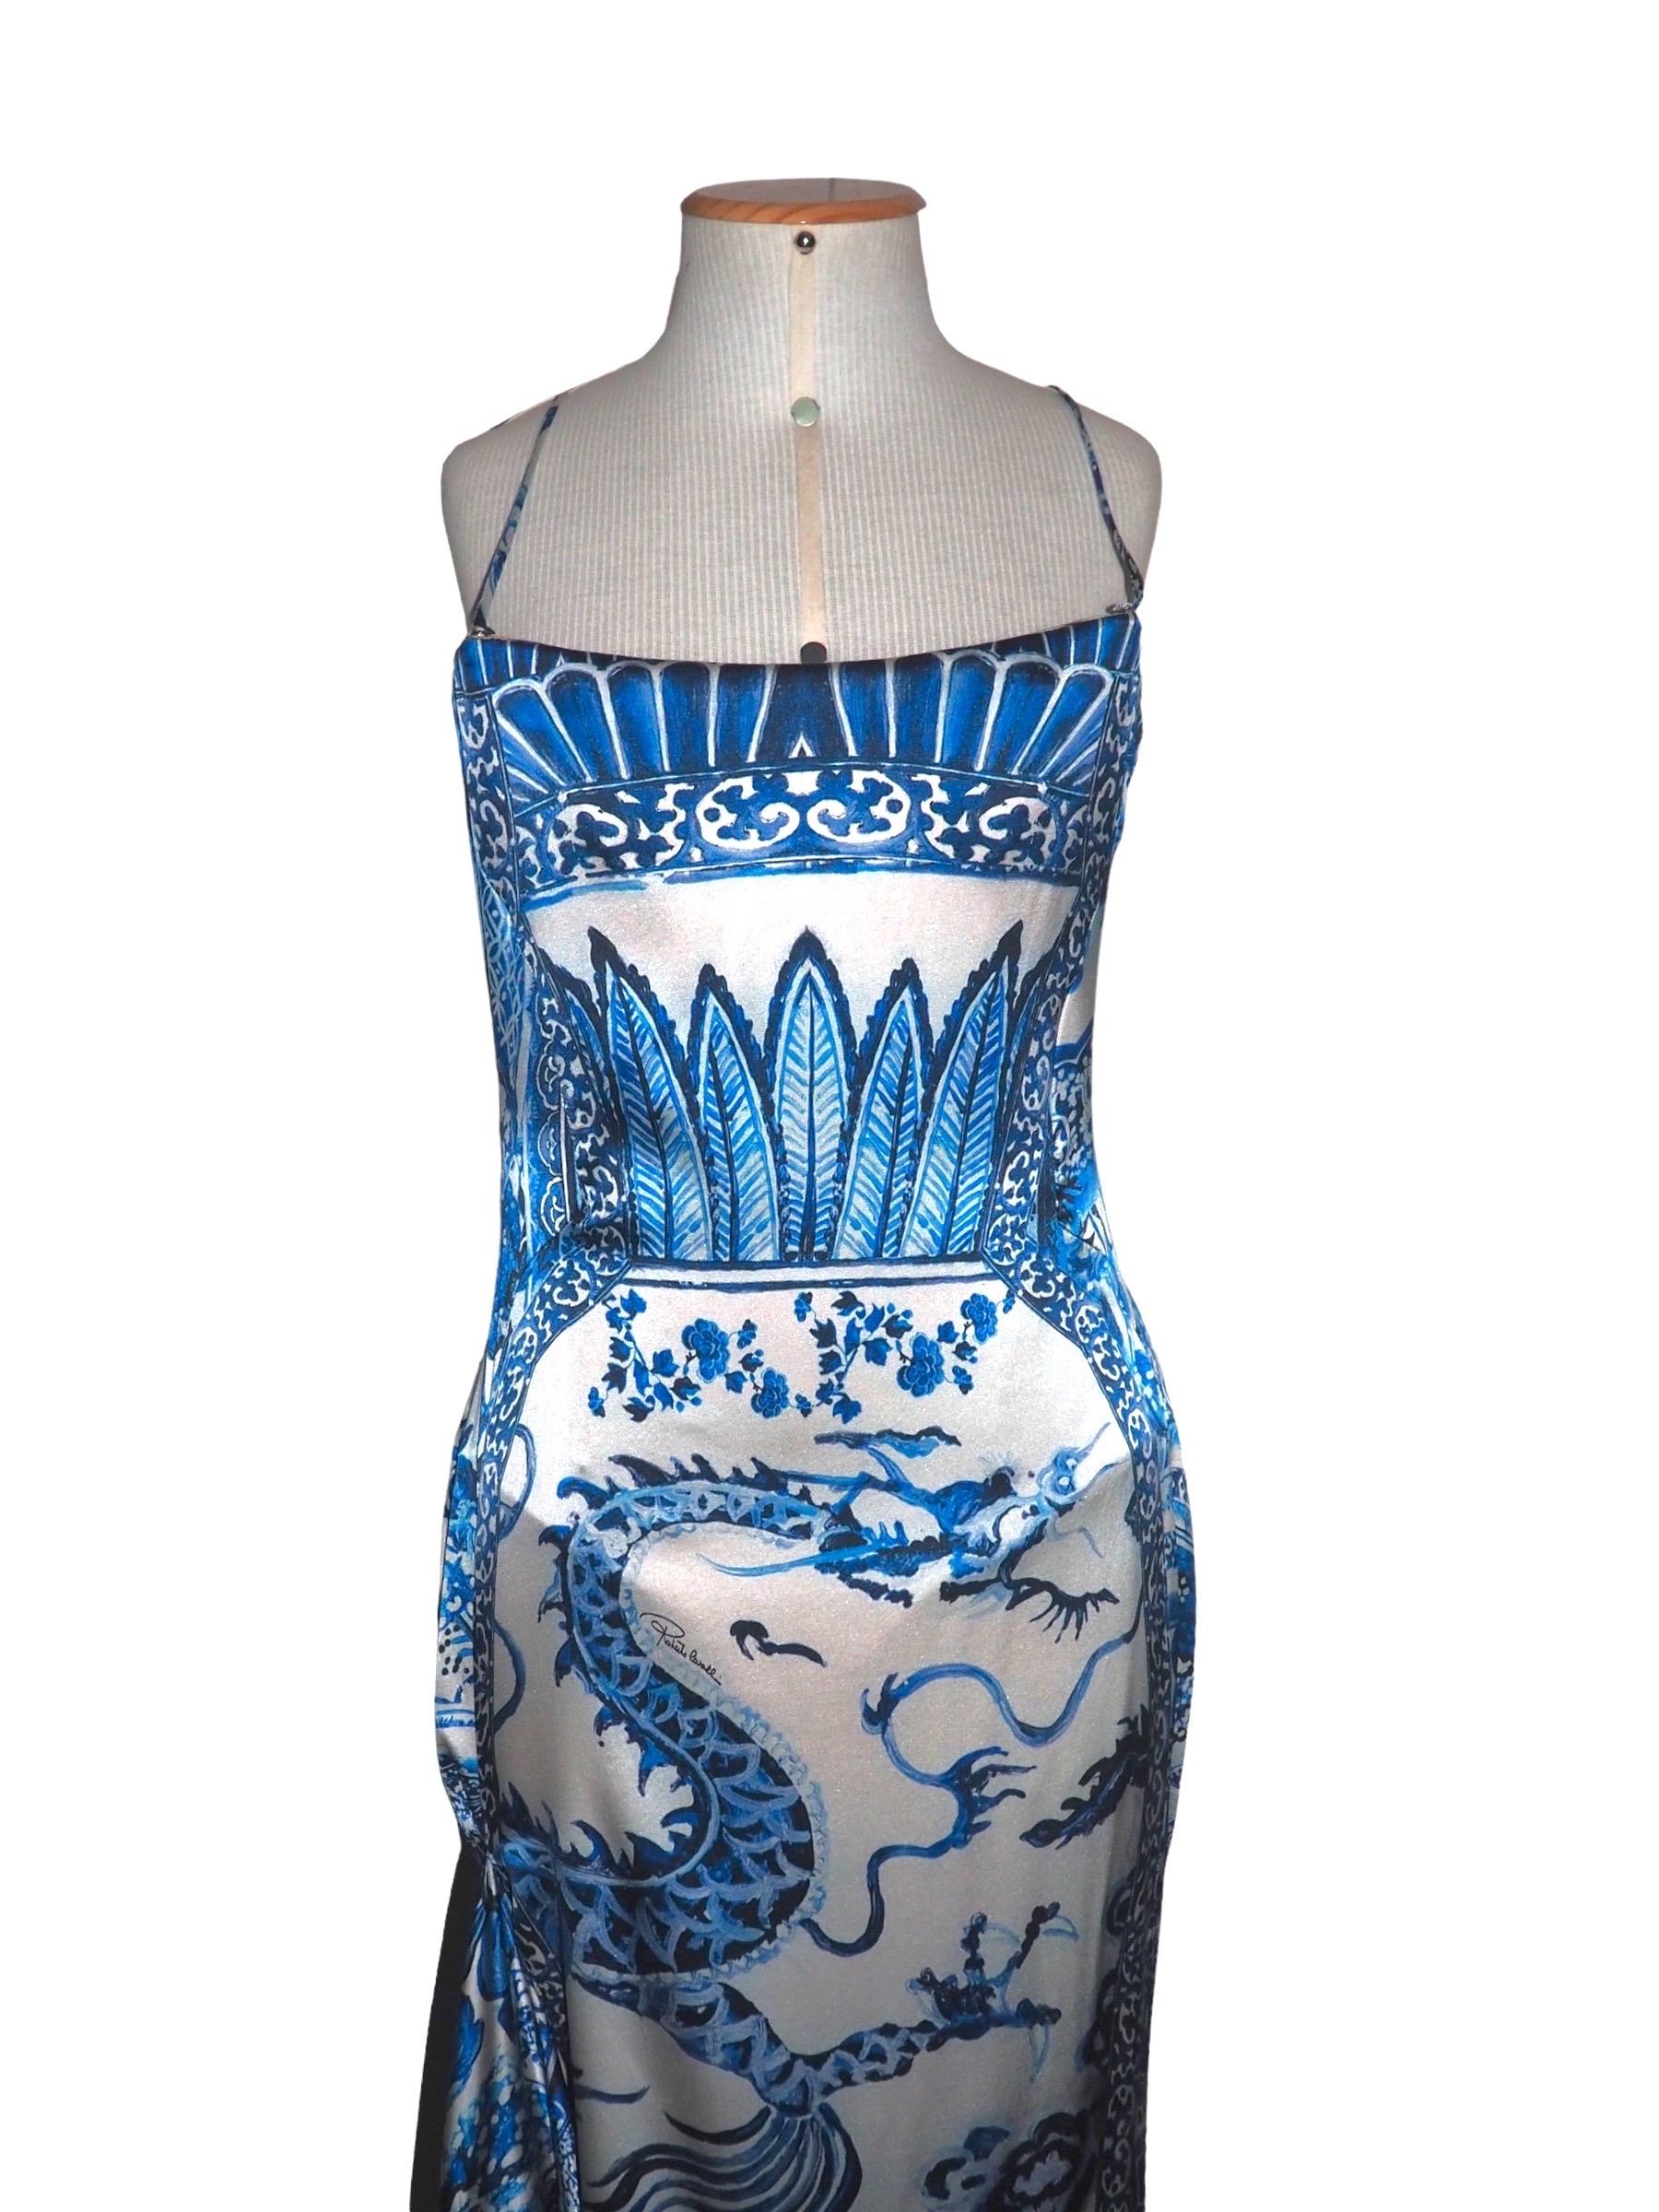 THE ICONIC RUNWAY AND MUSEUM PIECE Roberto Cavalli FW 2005 China tile print corseted gown as seen famously on Victoria Beckham and in the collection at the MET Museum for the China: Through the Looking Glass MET Gala exhibition! 

Internal corset